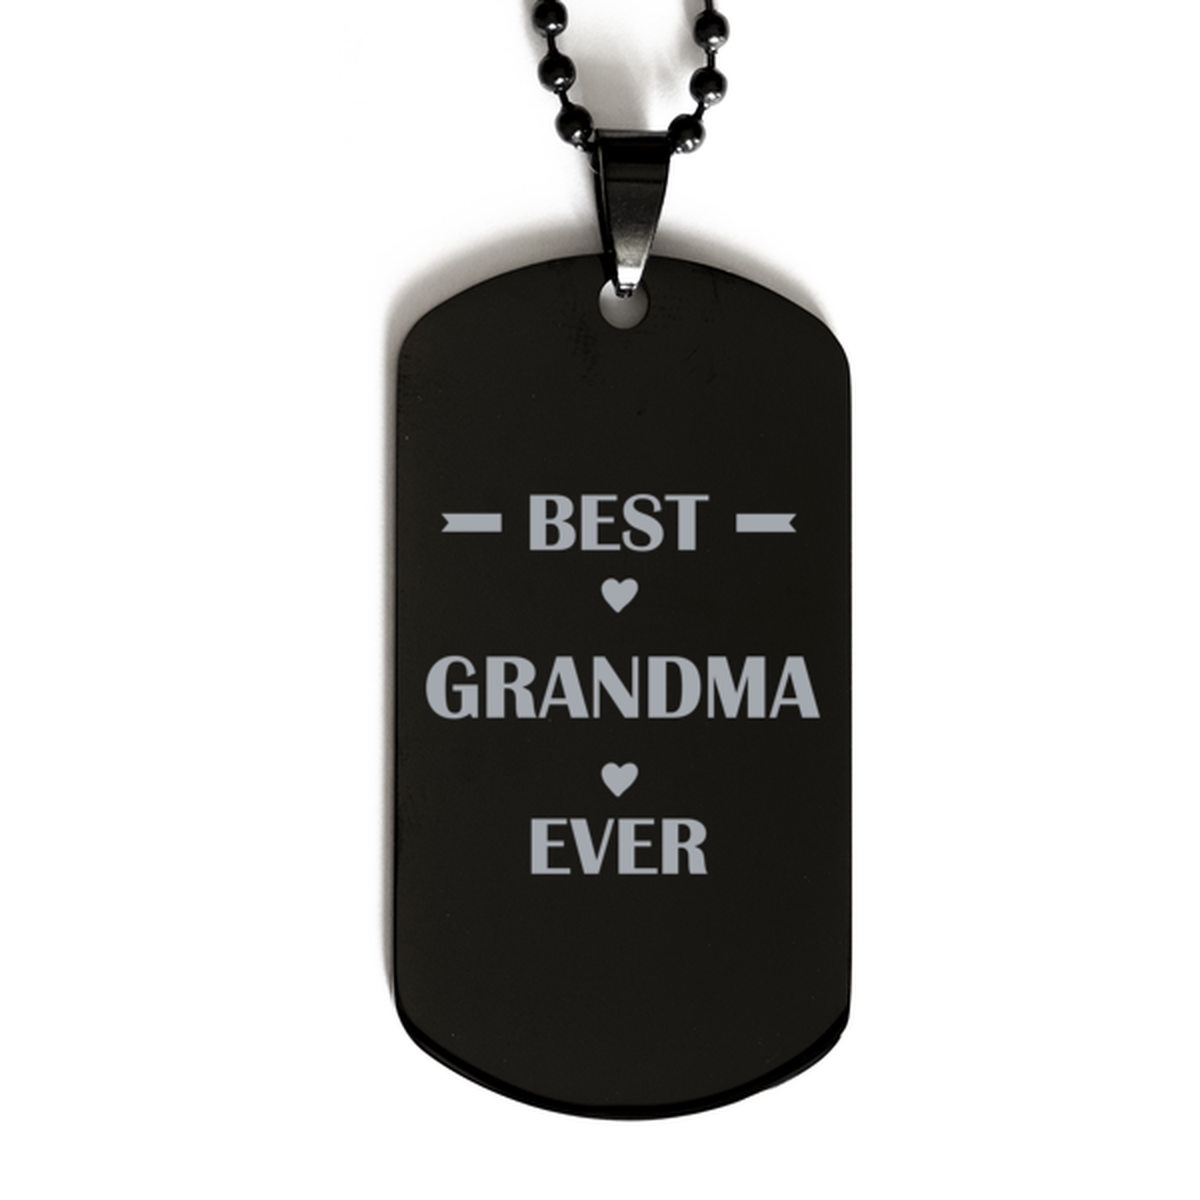 Best Grandma Ever Grandma Gifts, Funny Black Dog Tag For Grandma, Birthday Family Presents Engraved Necklace For Women